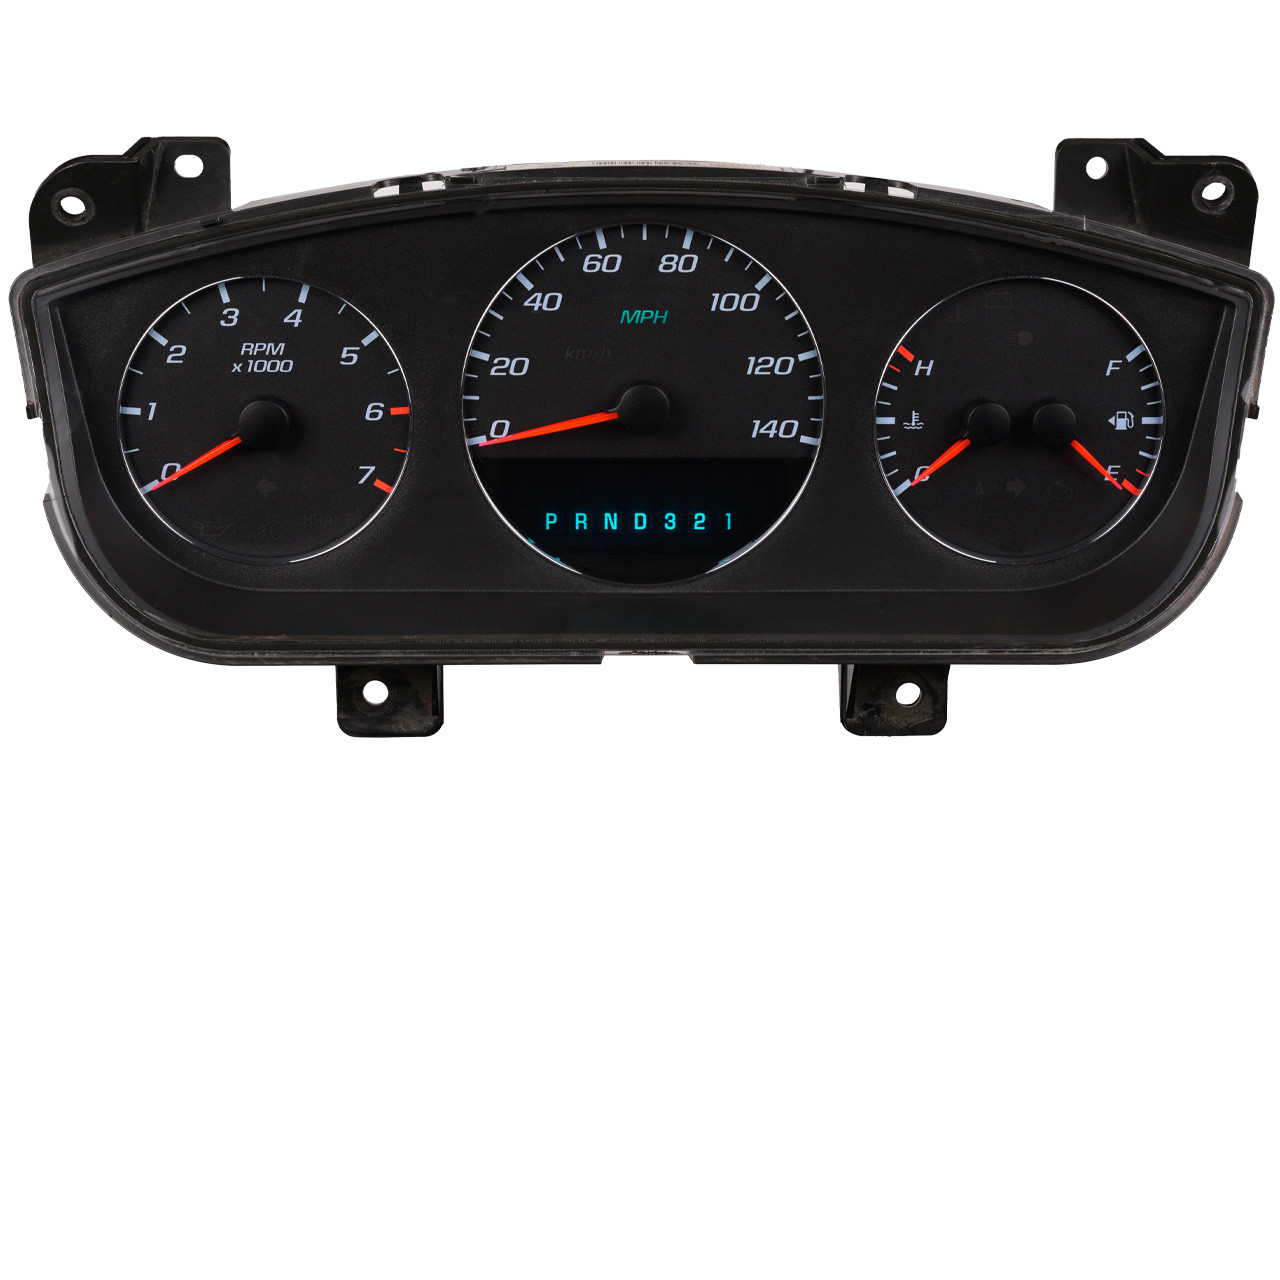 Chevy instrument cluster repair